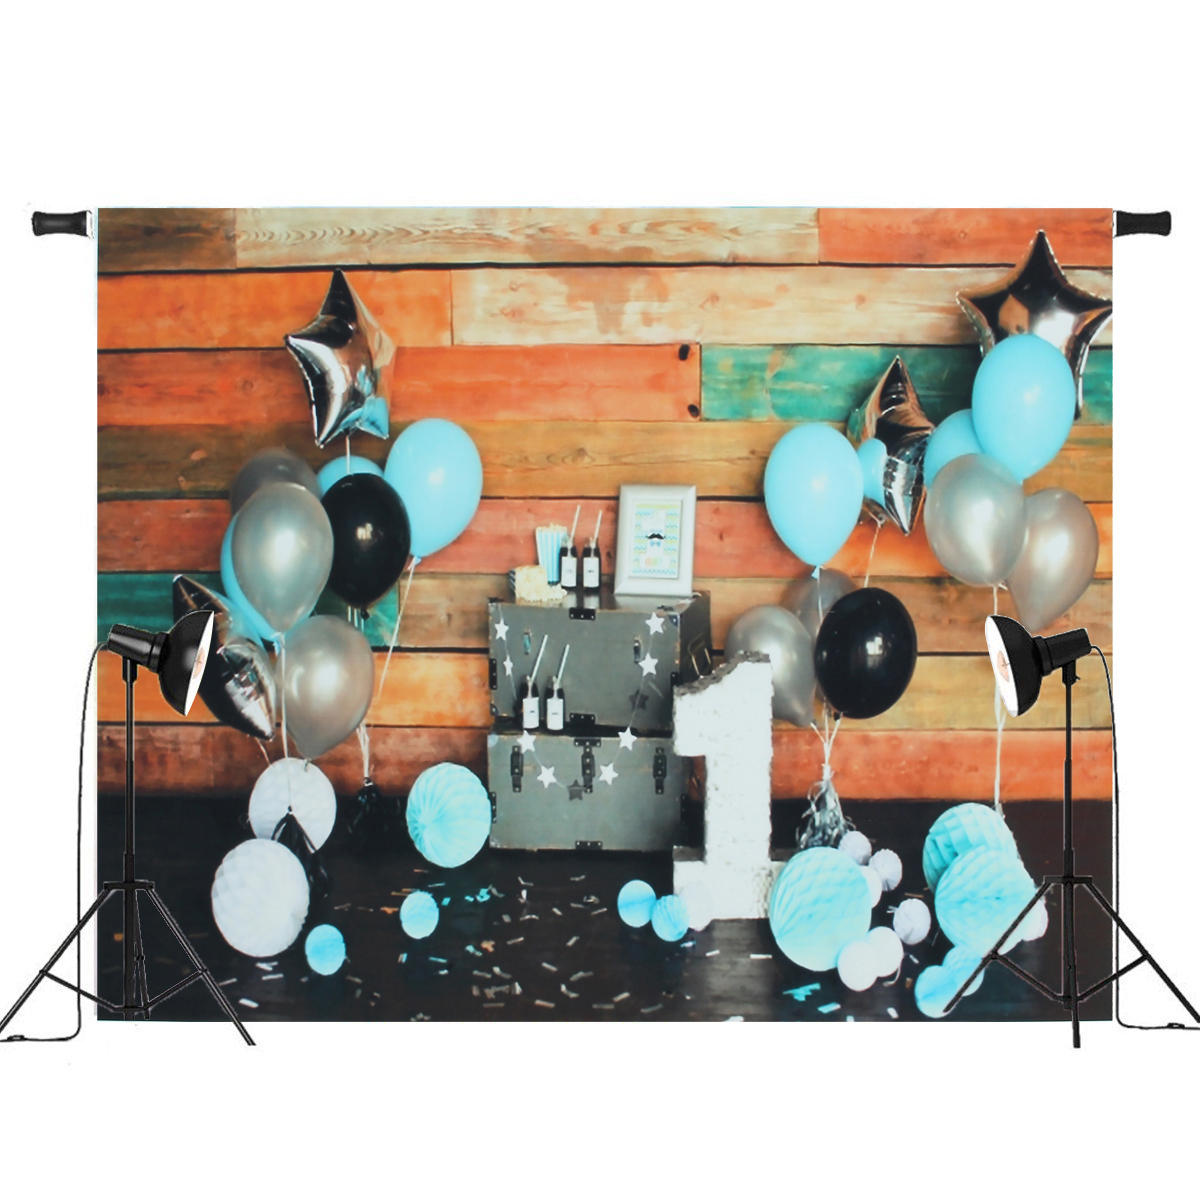 5x3ft 7x5ft Blue Balloon Colorful Wall Baby 1st Birthday Photography Backdrop Studio Prop Background